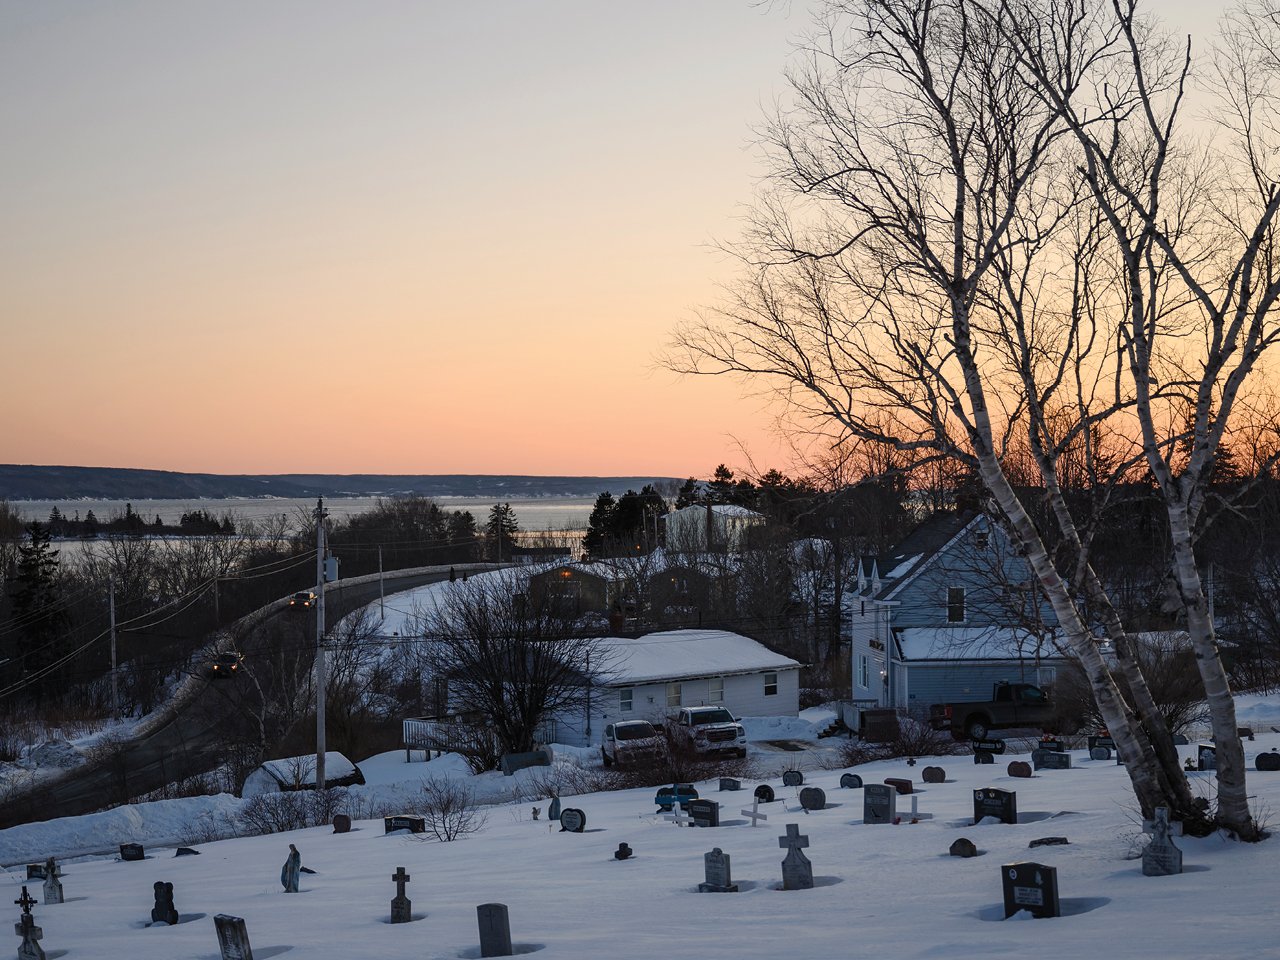 A photo of a hillside cemetary at dusk